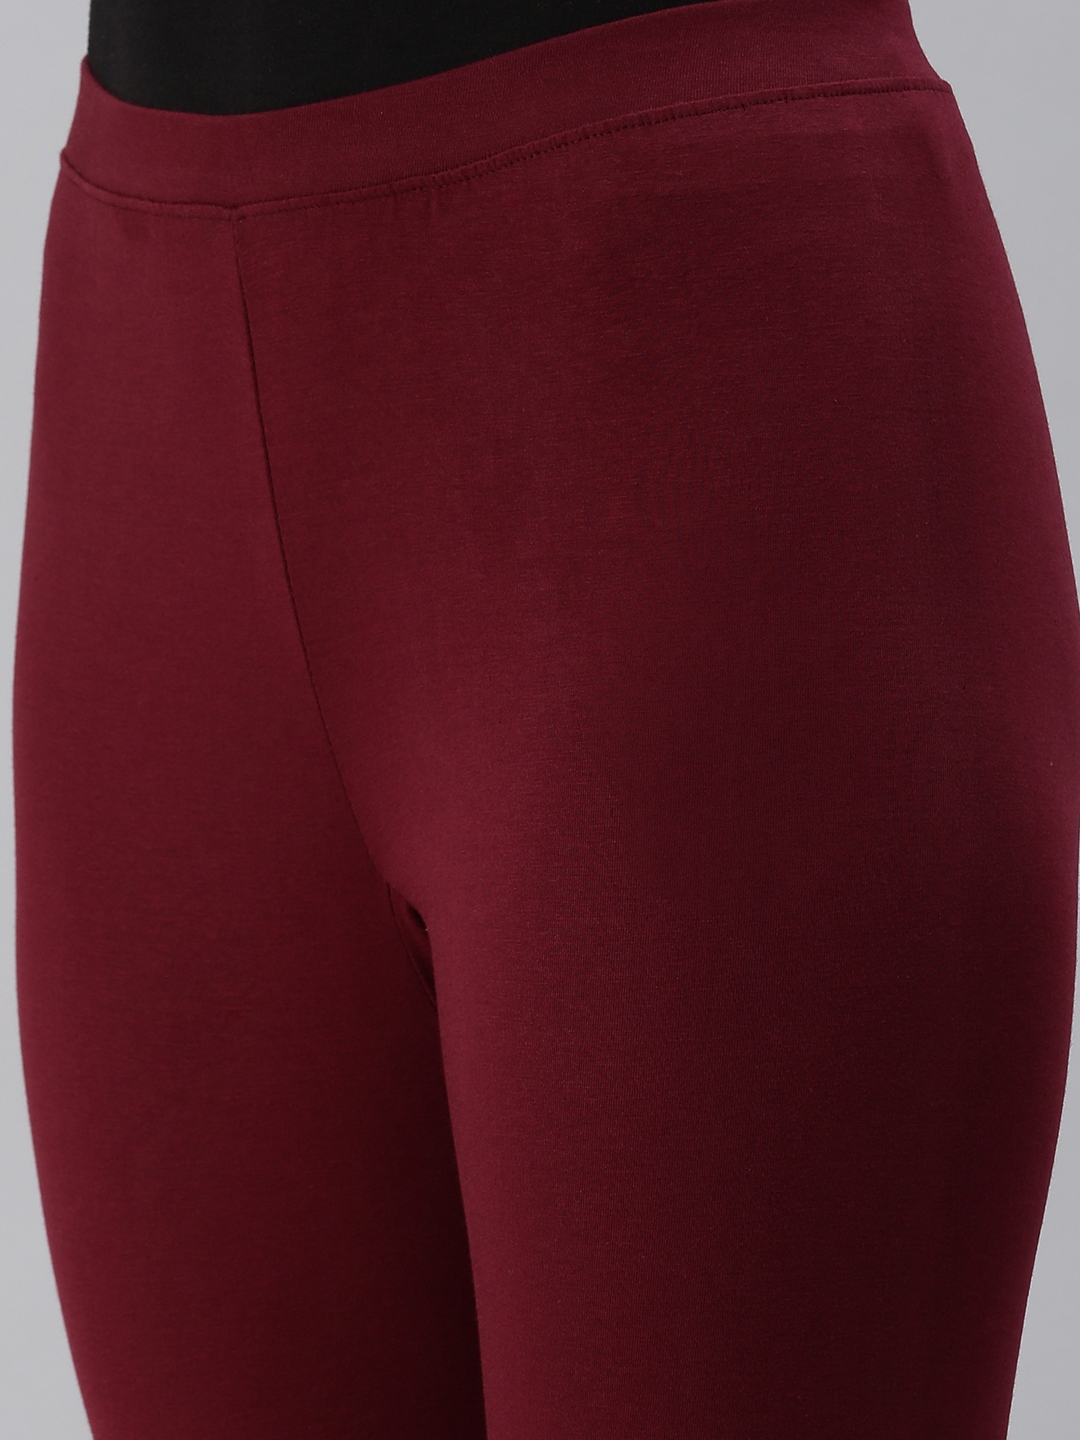 maroon solid ankle length legging